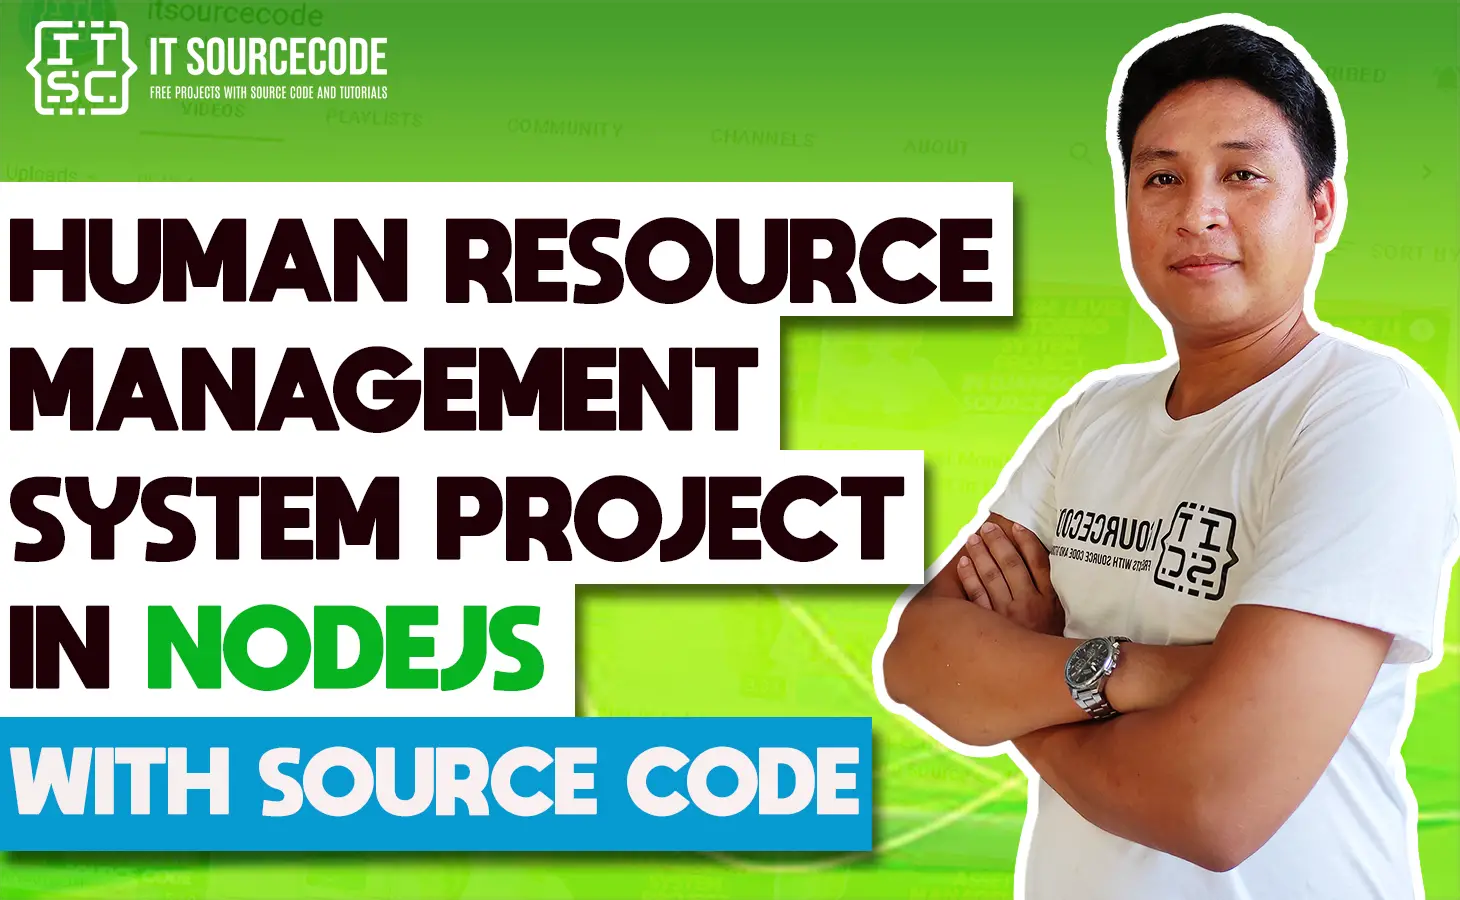 Human Resource Management System Project in NodeJS Source Code